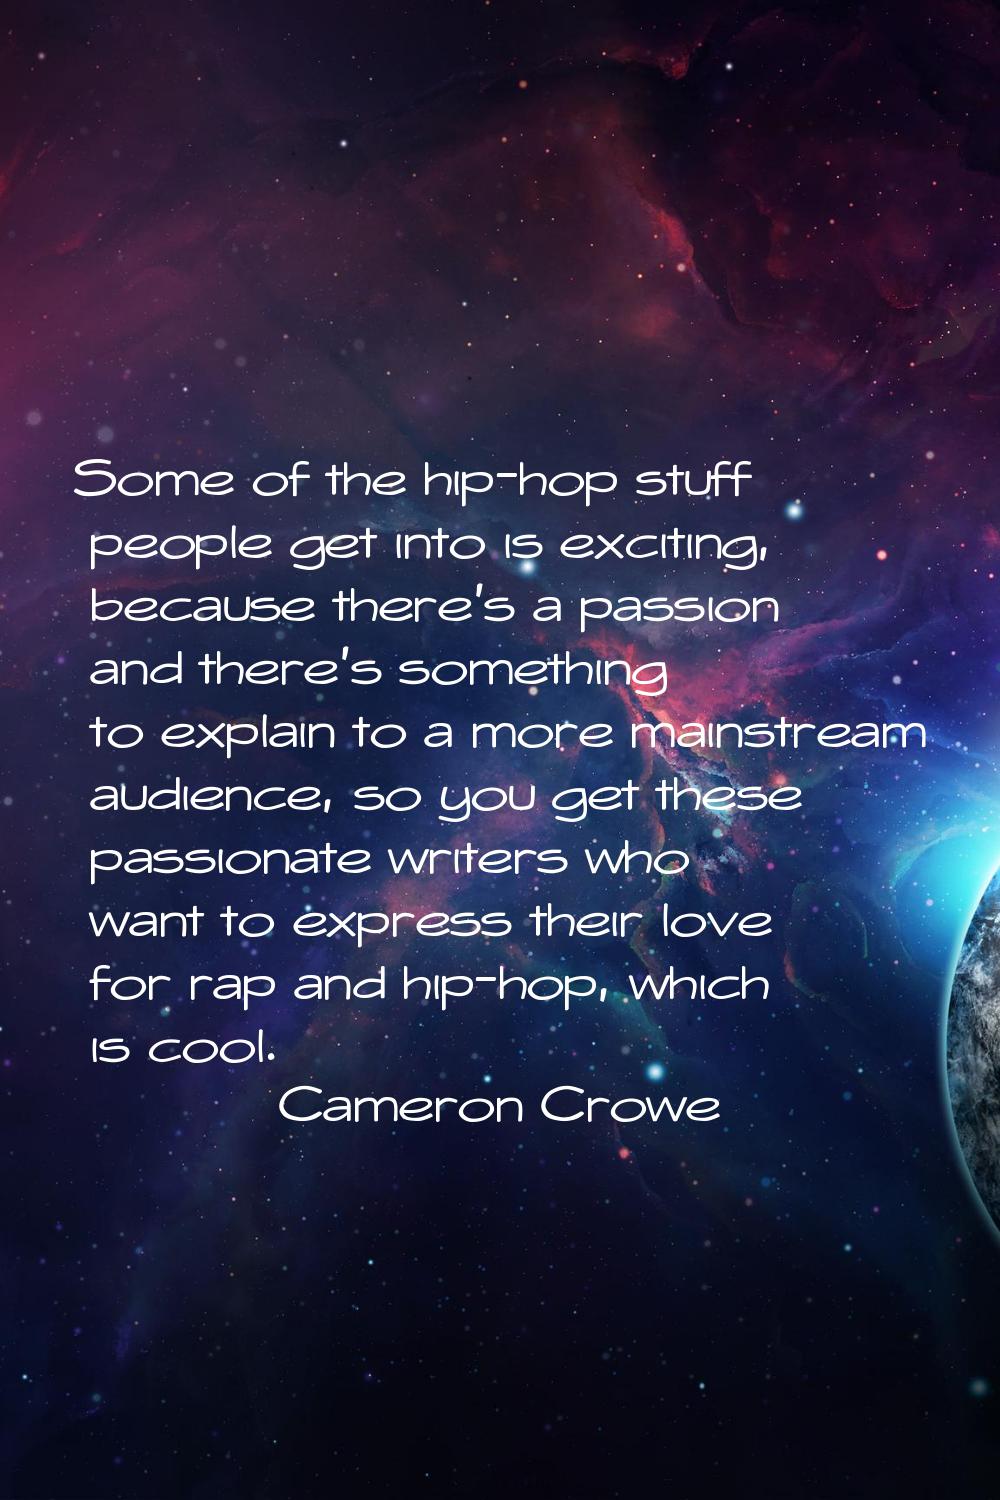 Some of the hip-hop stuff people get into is exciting, because there's a passion and there's someth